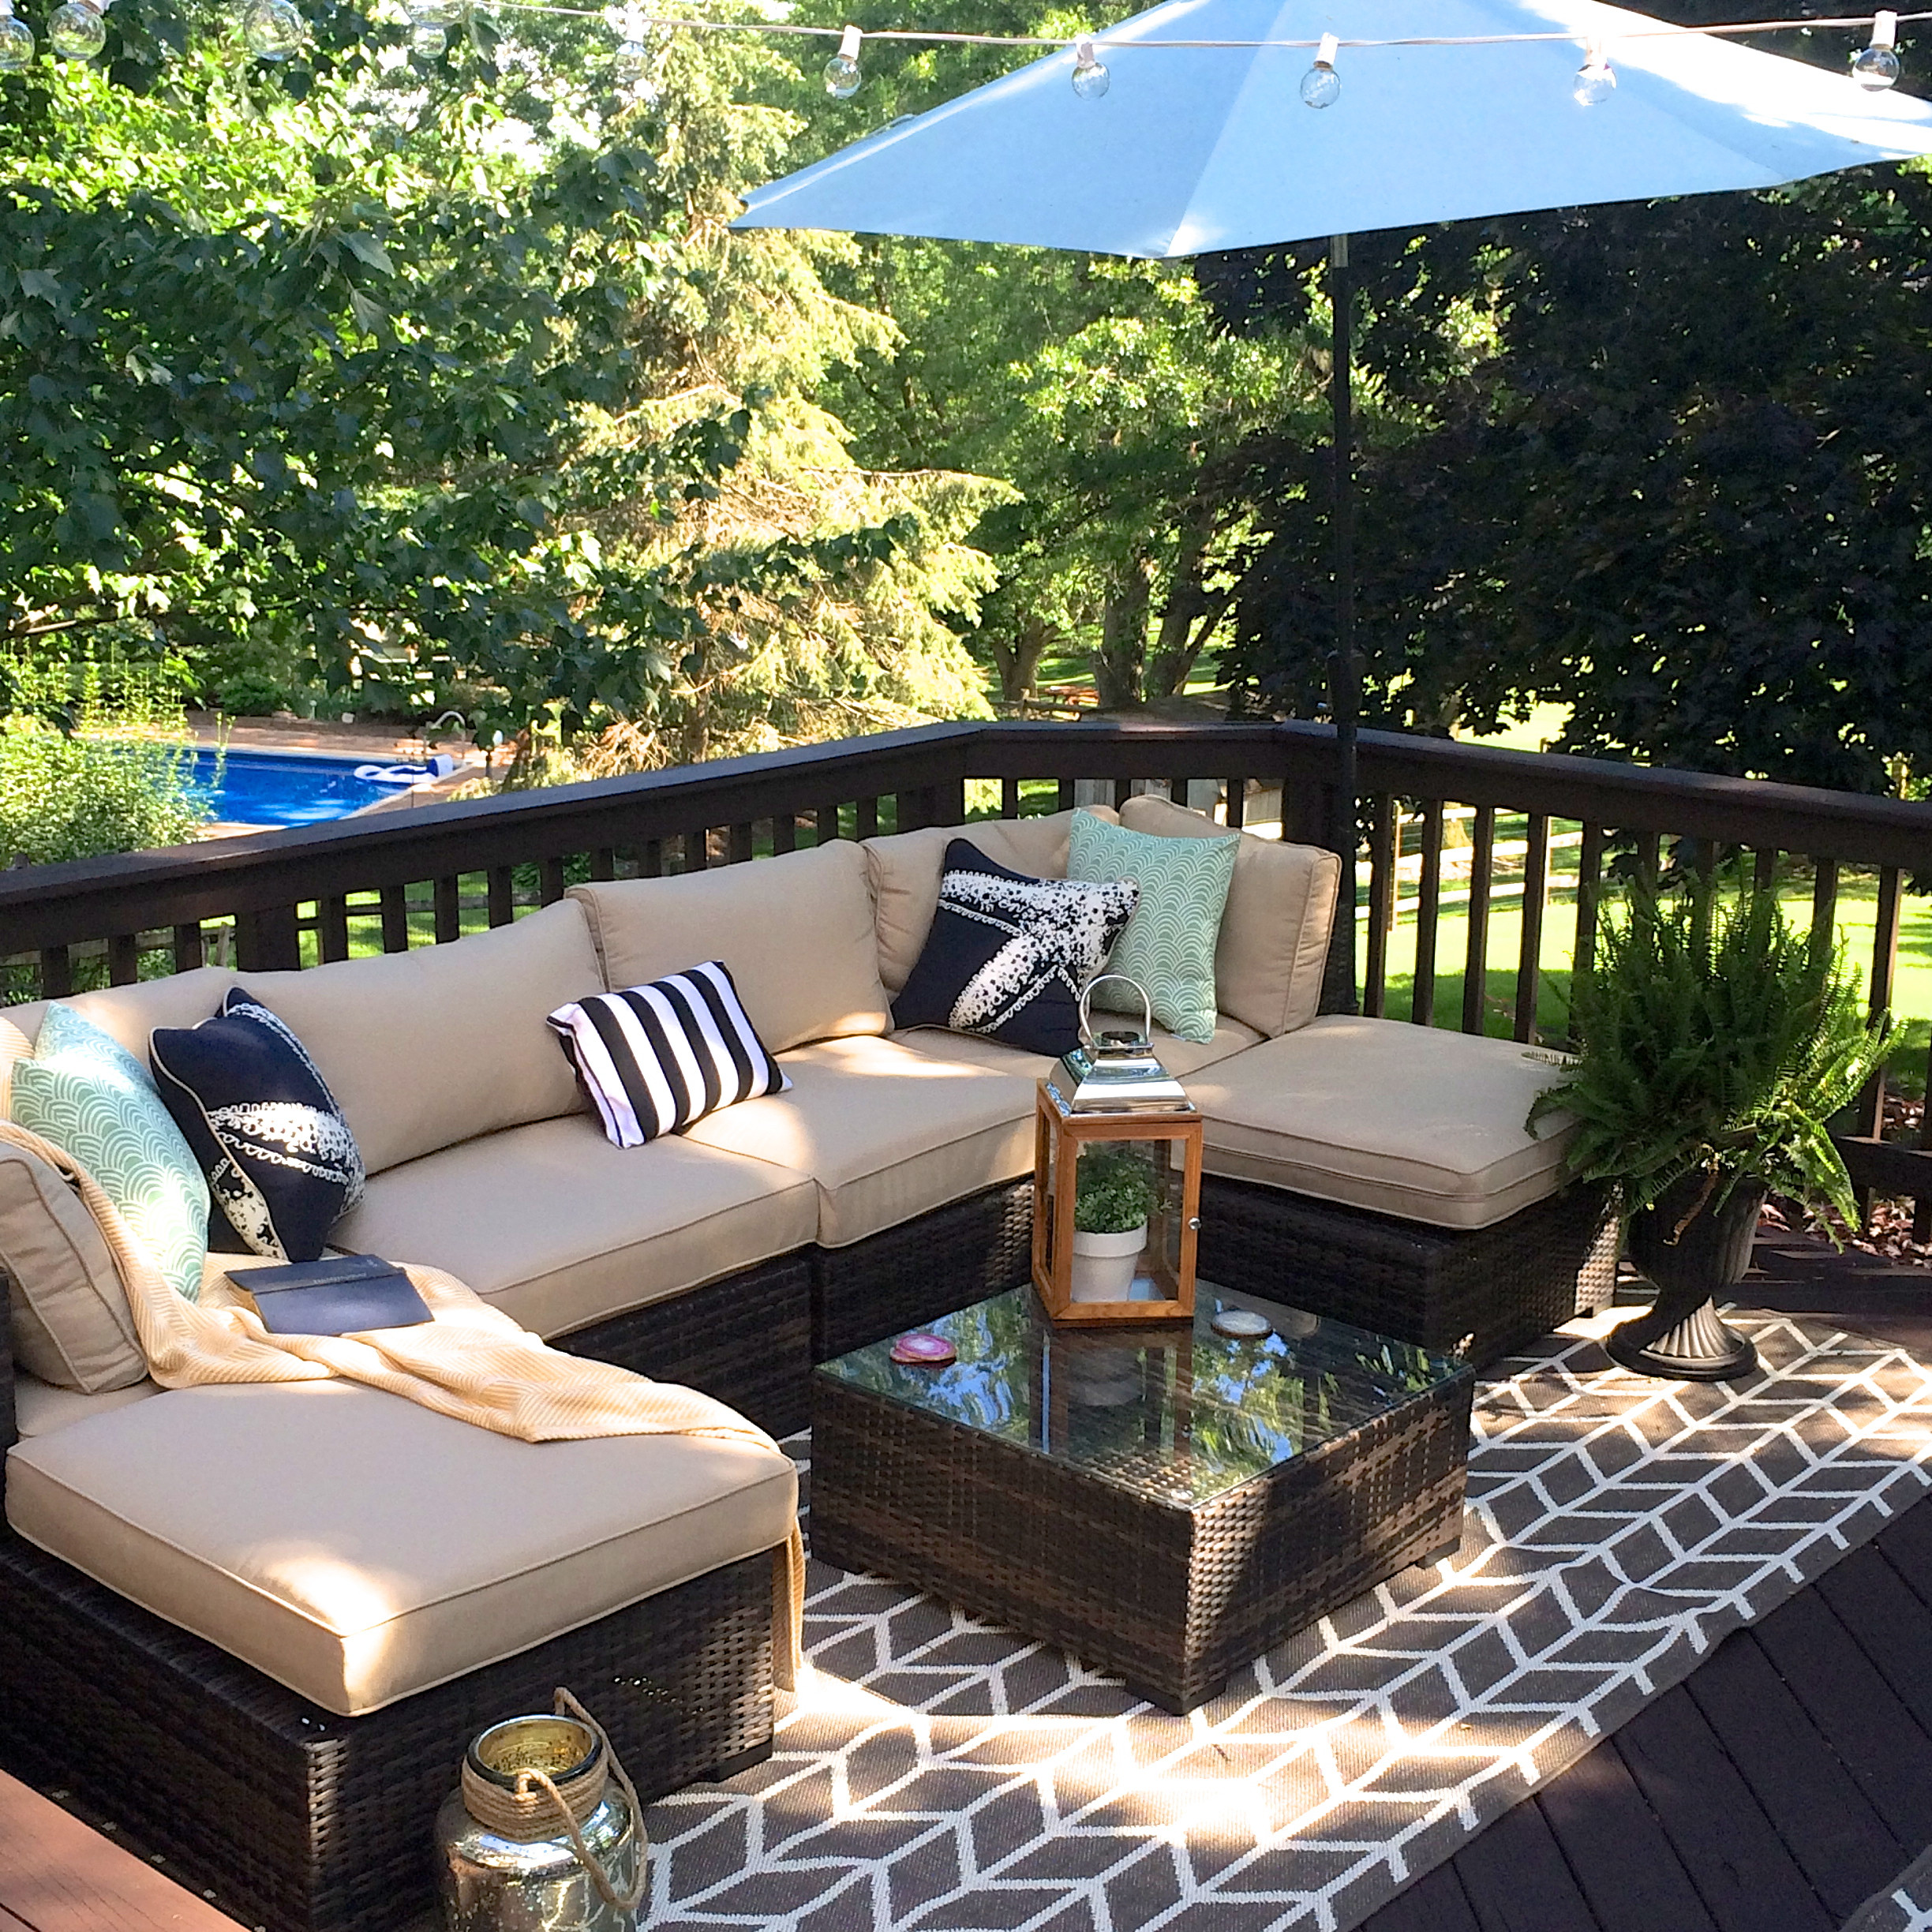 DIY Outdoor Space
 Our Outdoor Living Room & DIY Deck Makeover Reveal